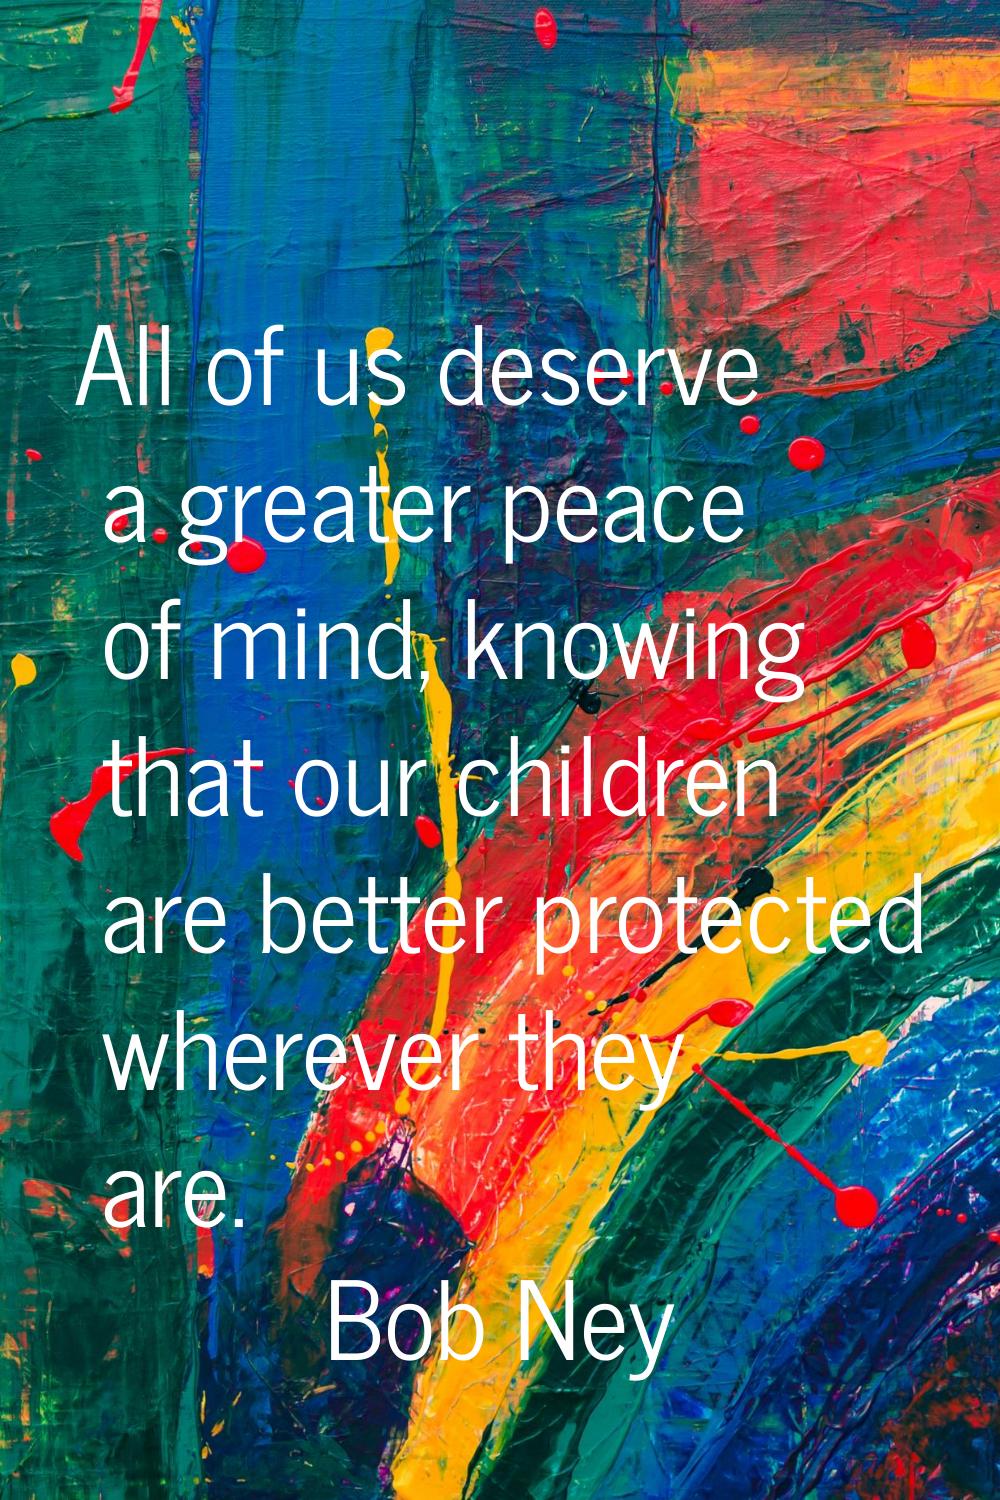 All of us deserve a greater peace of mind, knowing that our children are better protected wherever 